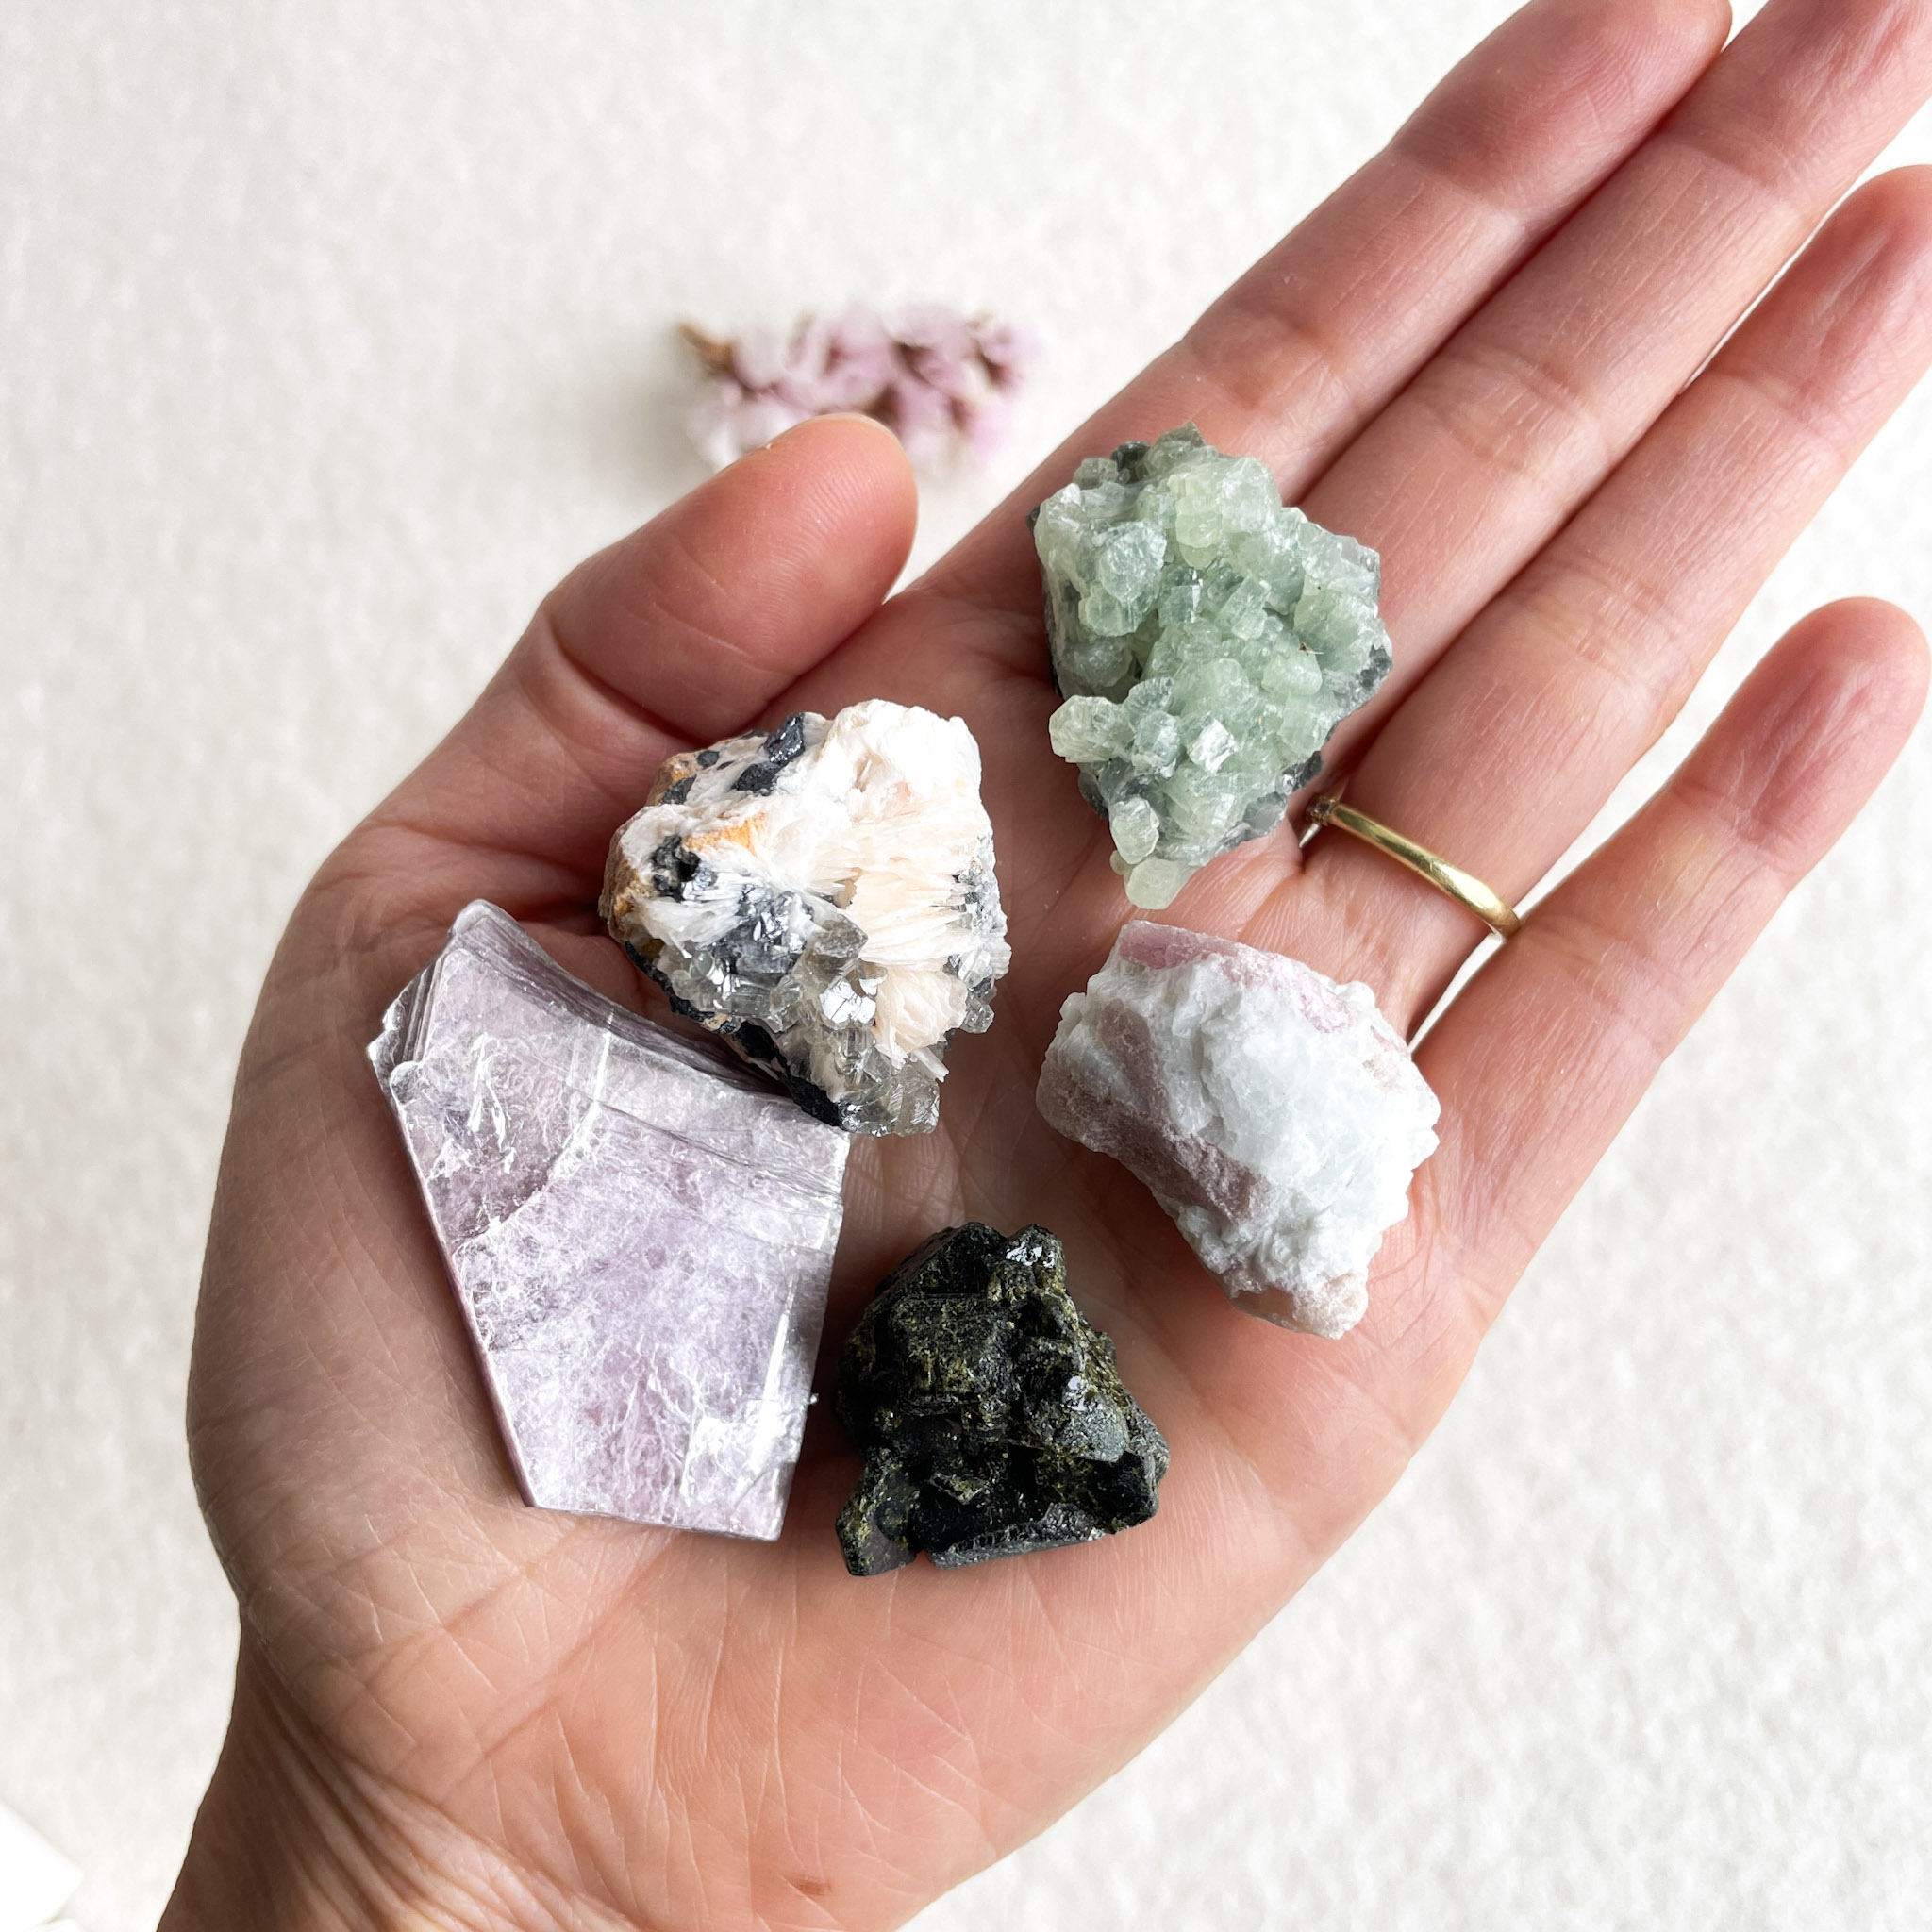 A person's open palm holding a collection of various mineral stones of different textures and colors against a lightly textured white background.